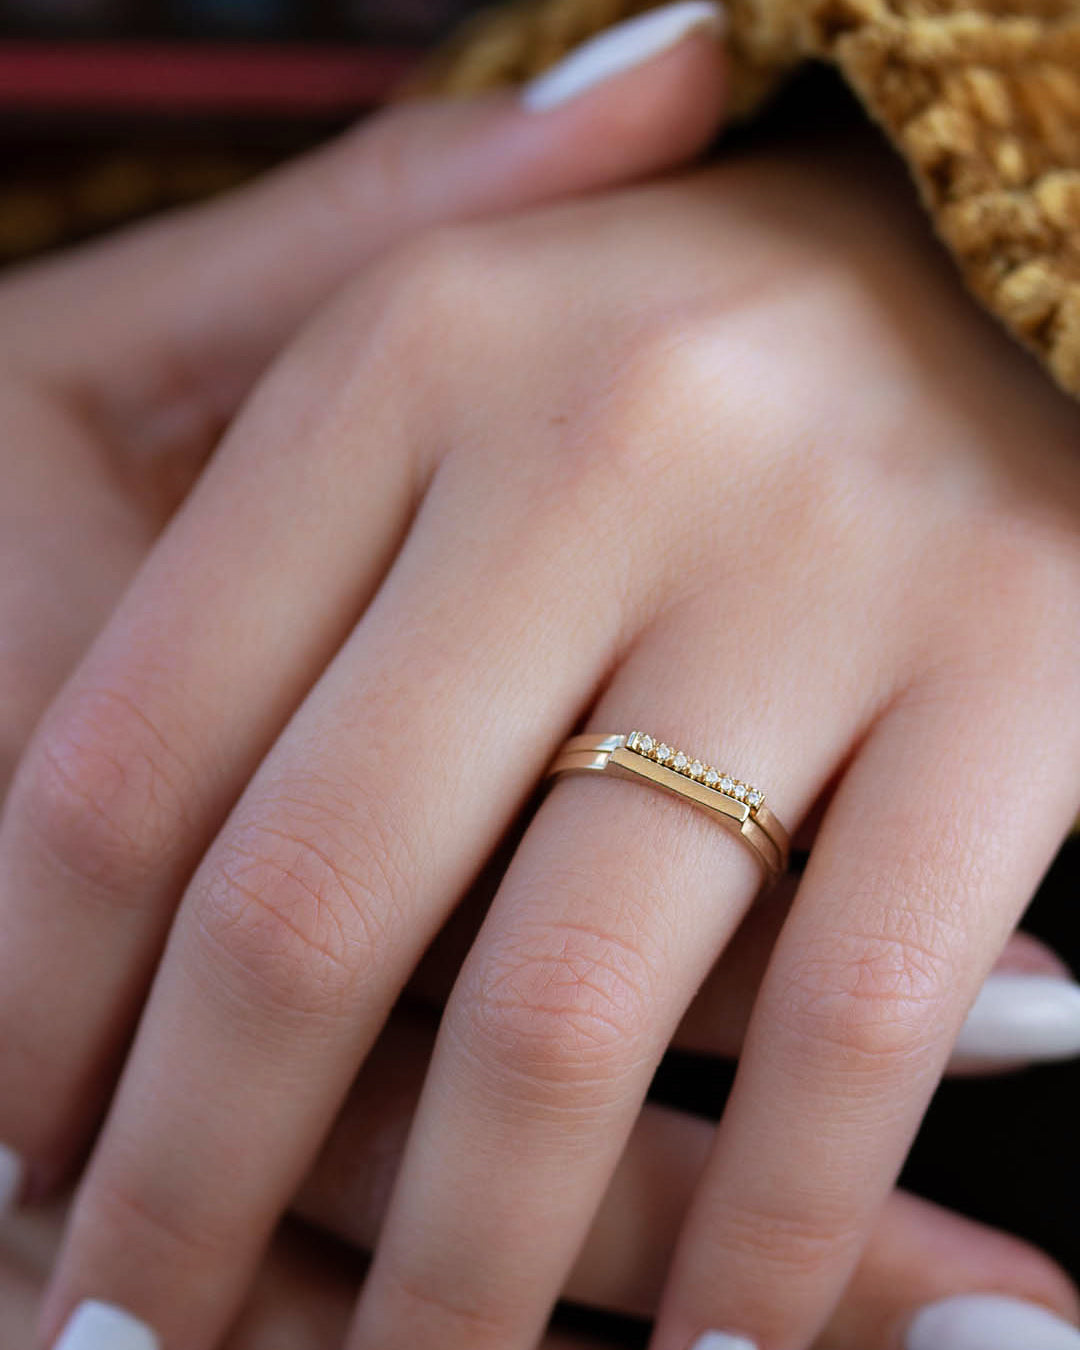 A dainty 14k yellow gold stackable ring.